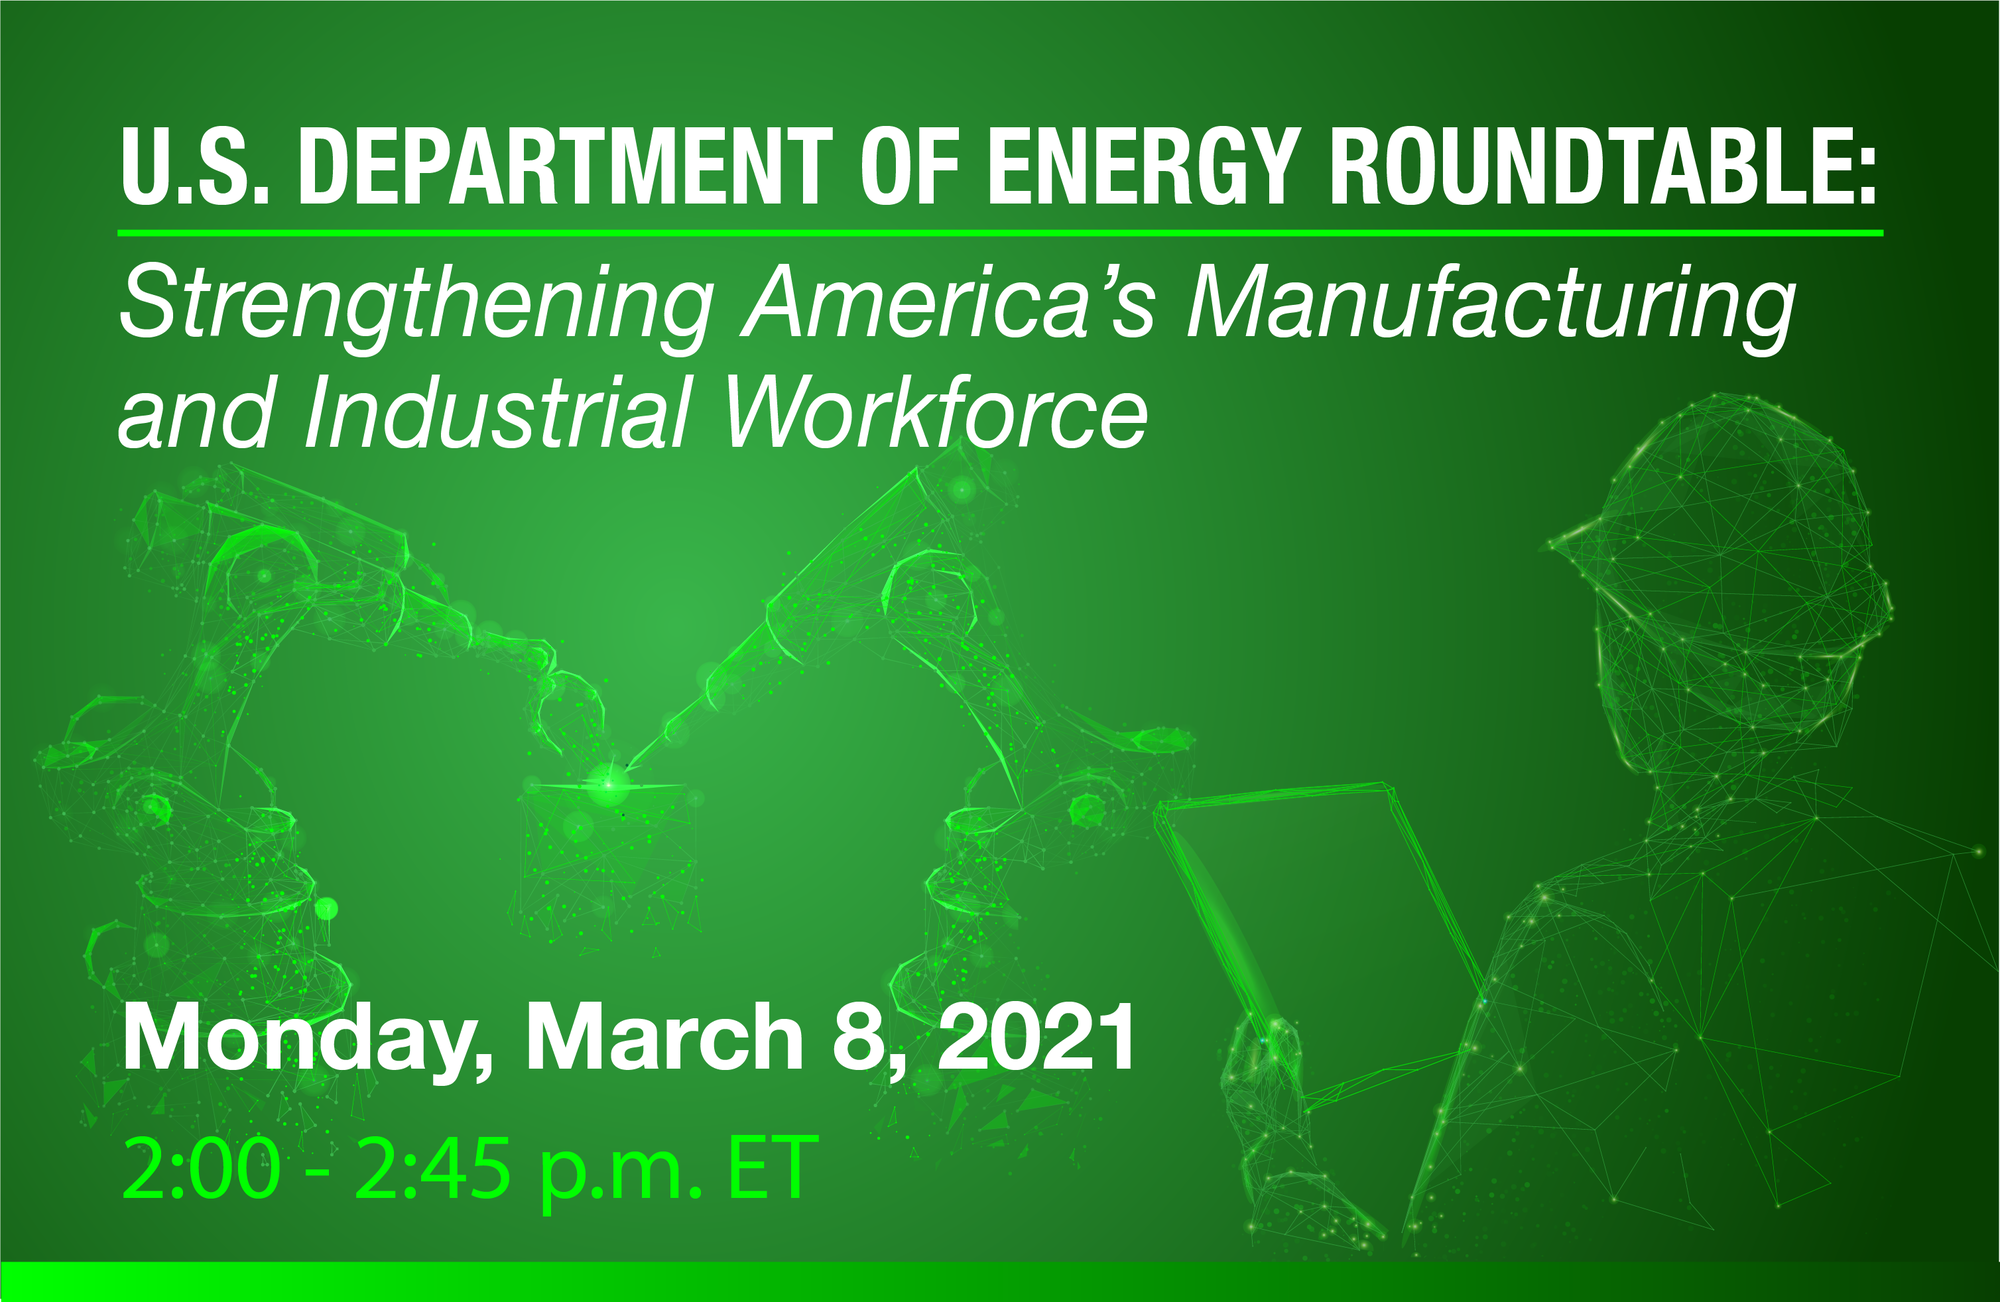 US Department of Energy Roundtable - Monday March 8, 2021